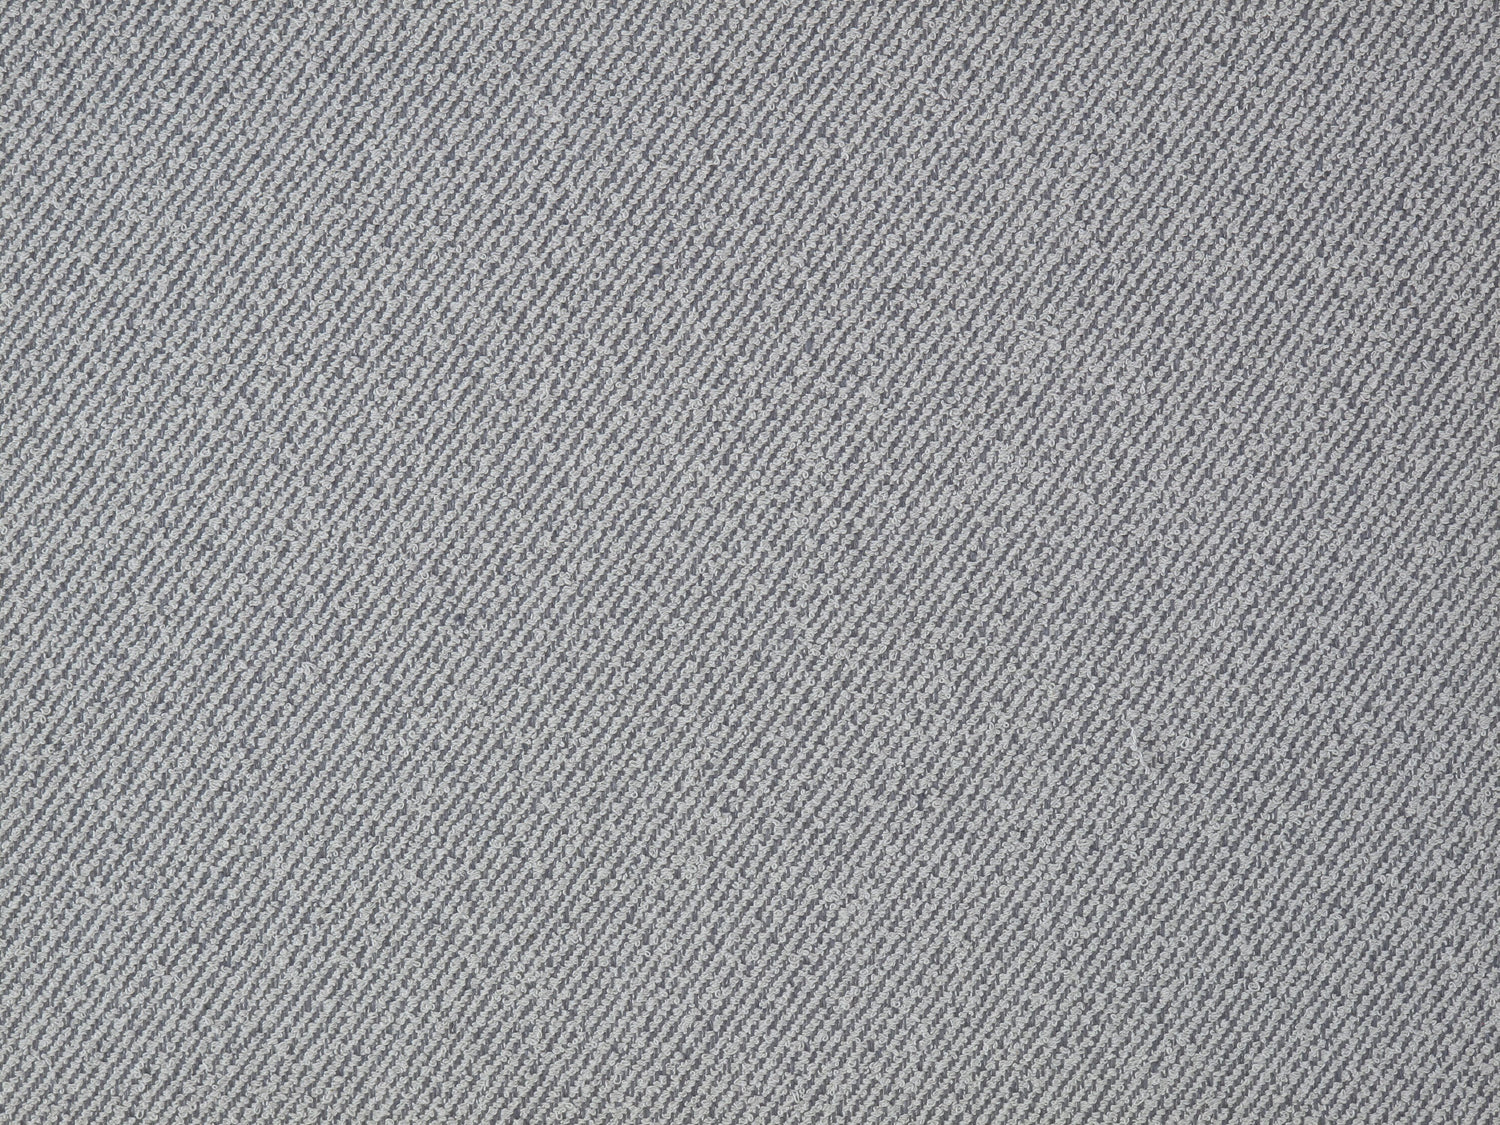 Ashford fabric in gray mist color - pattern number DI 00131451 - by Scalamandre in the Old World Weavers collection